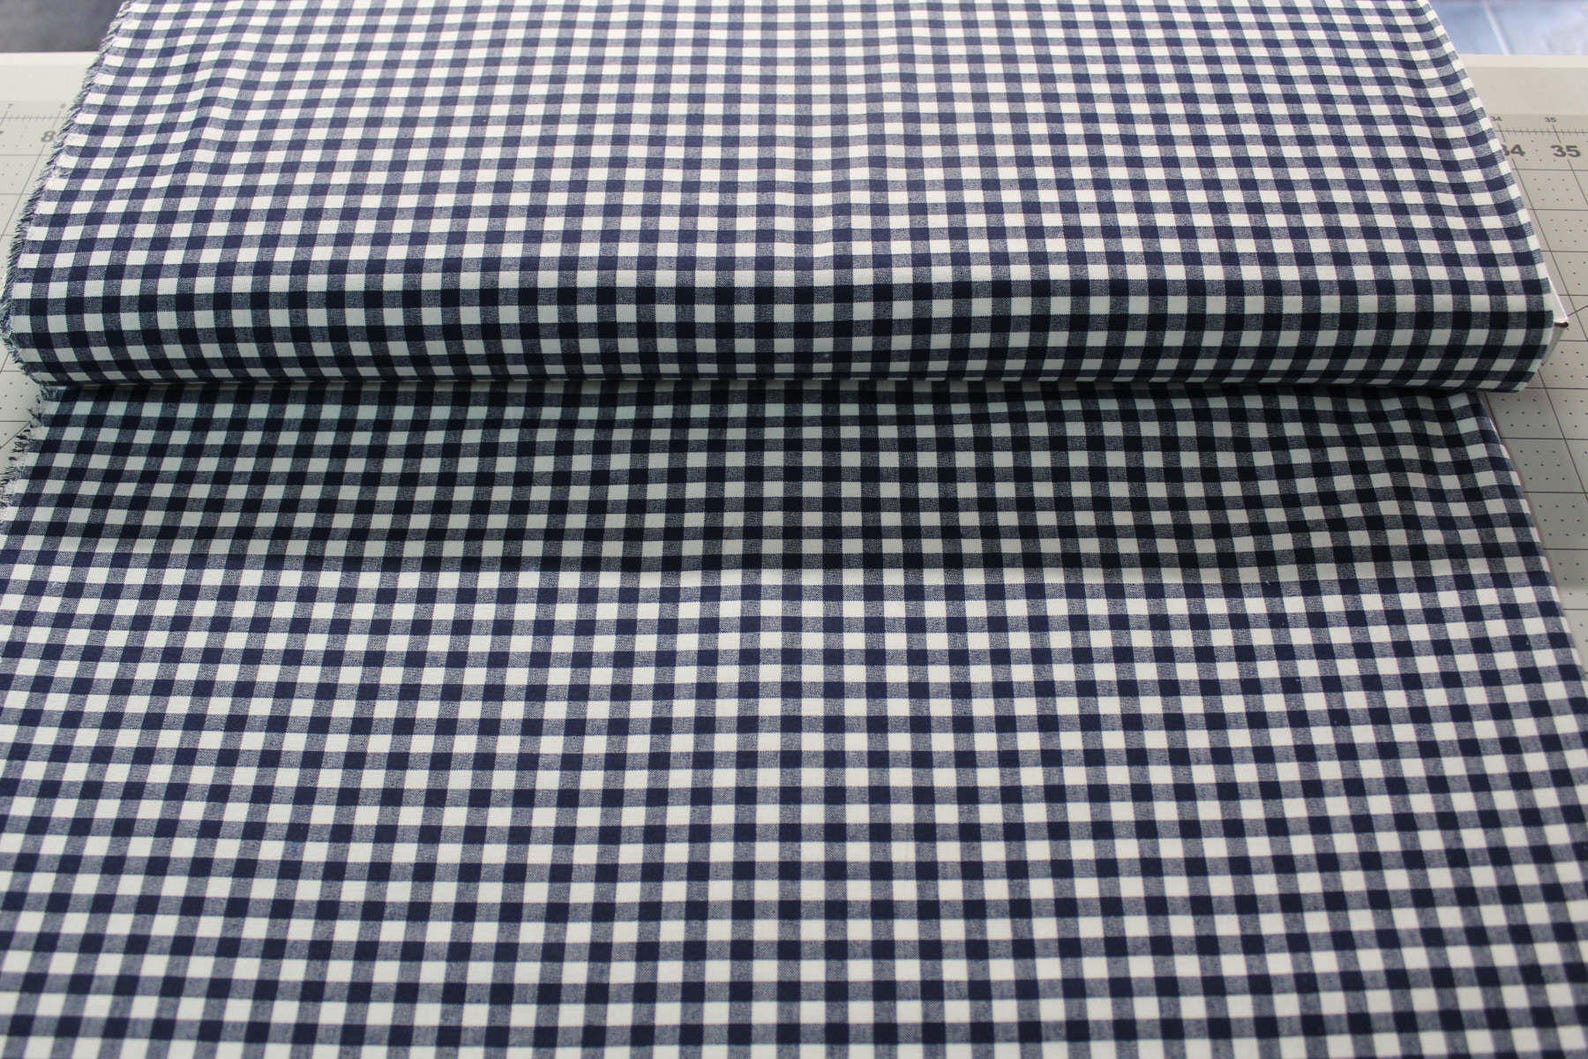 Checkered Cotton Fabric In Navy and White | Etsy